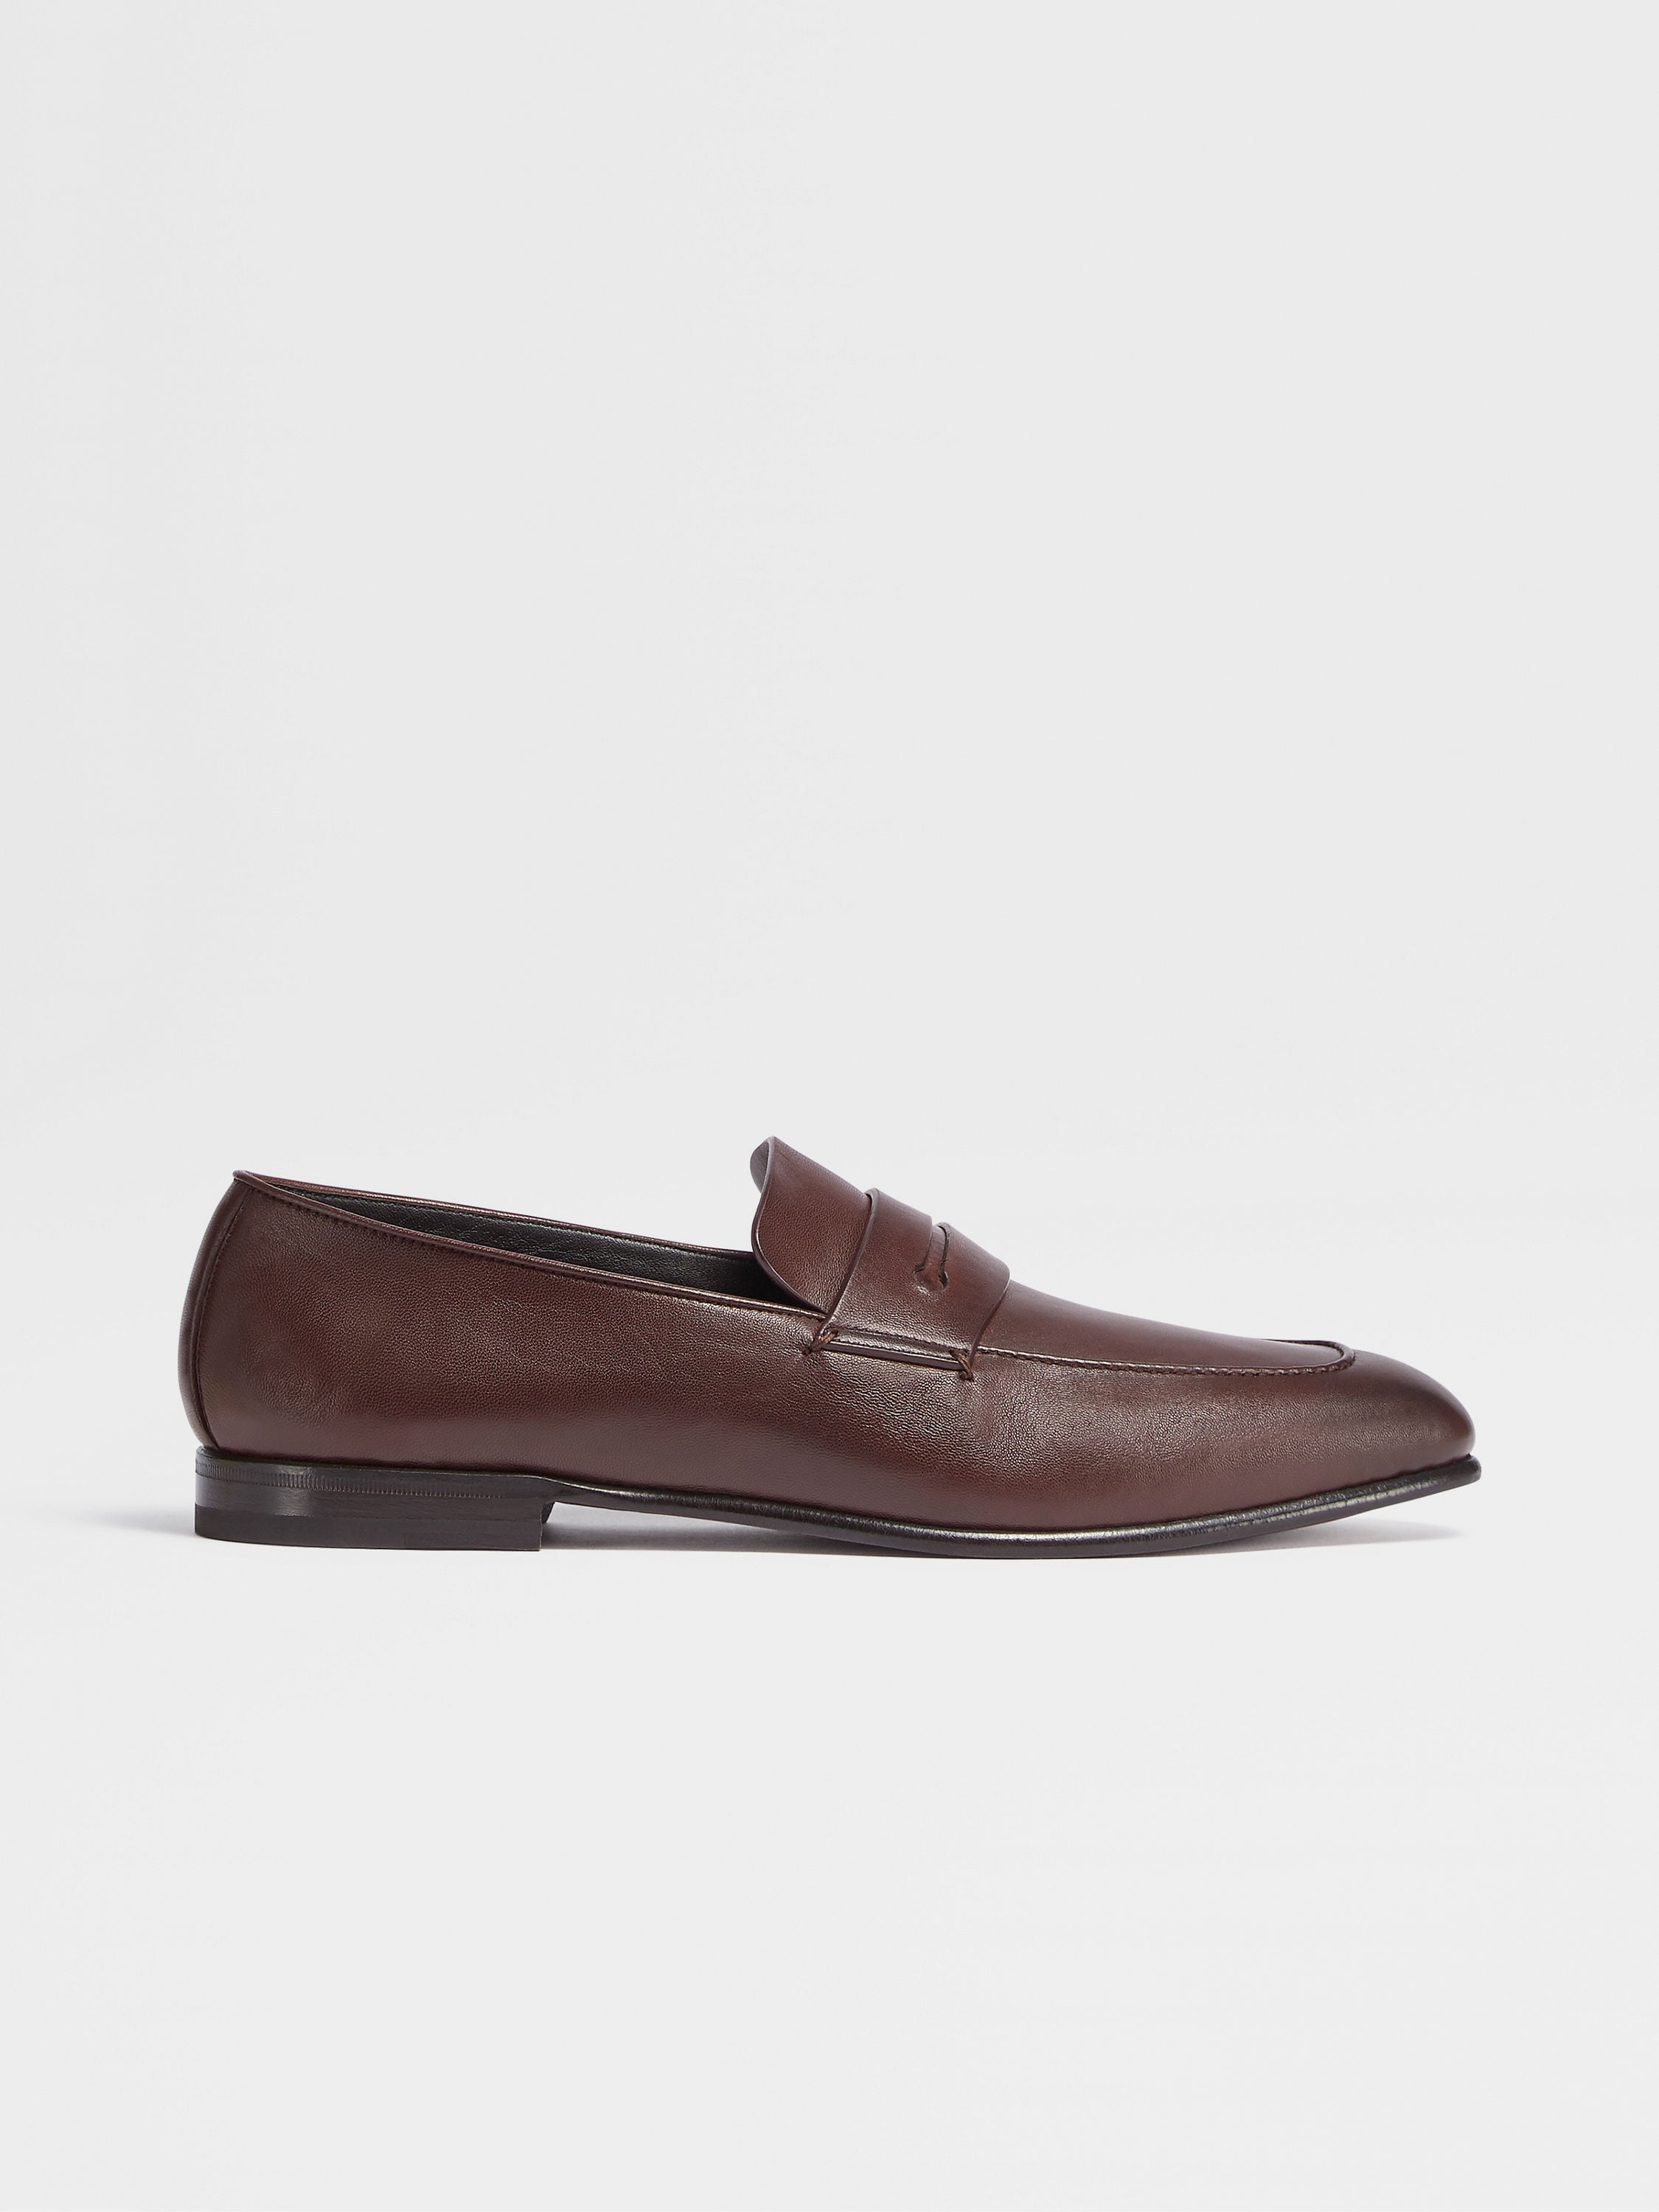 Dark Brown Leather L'Asola Loafers